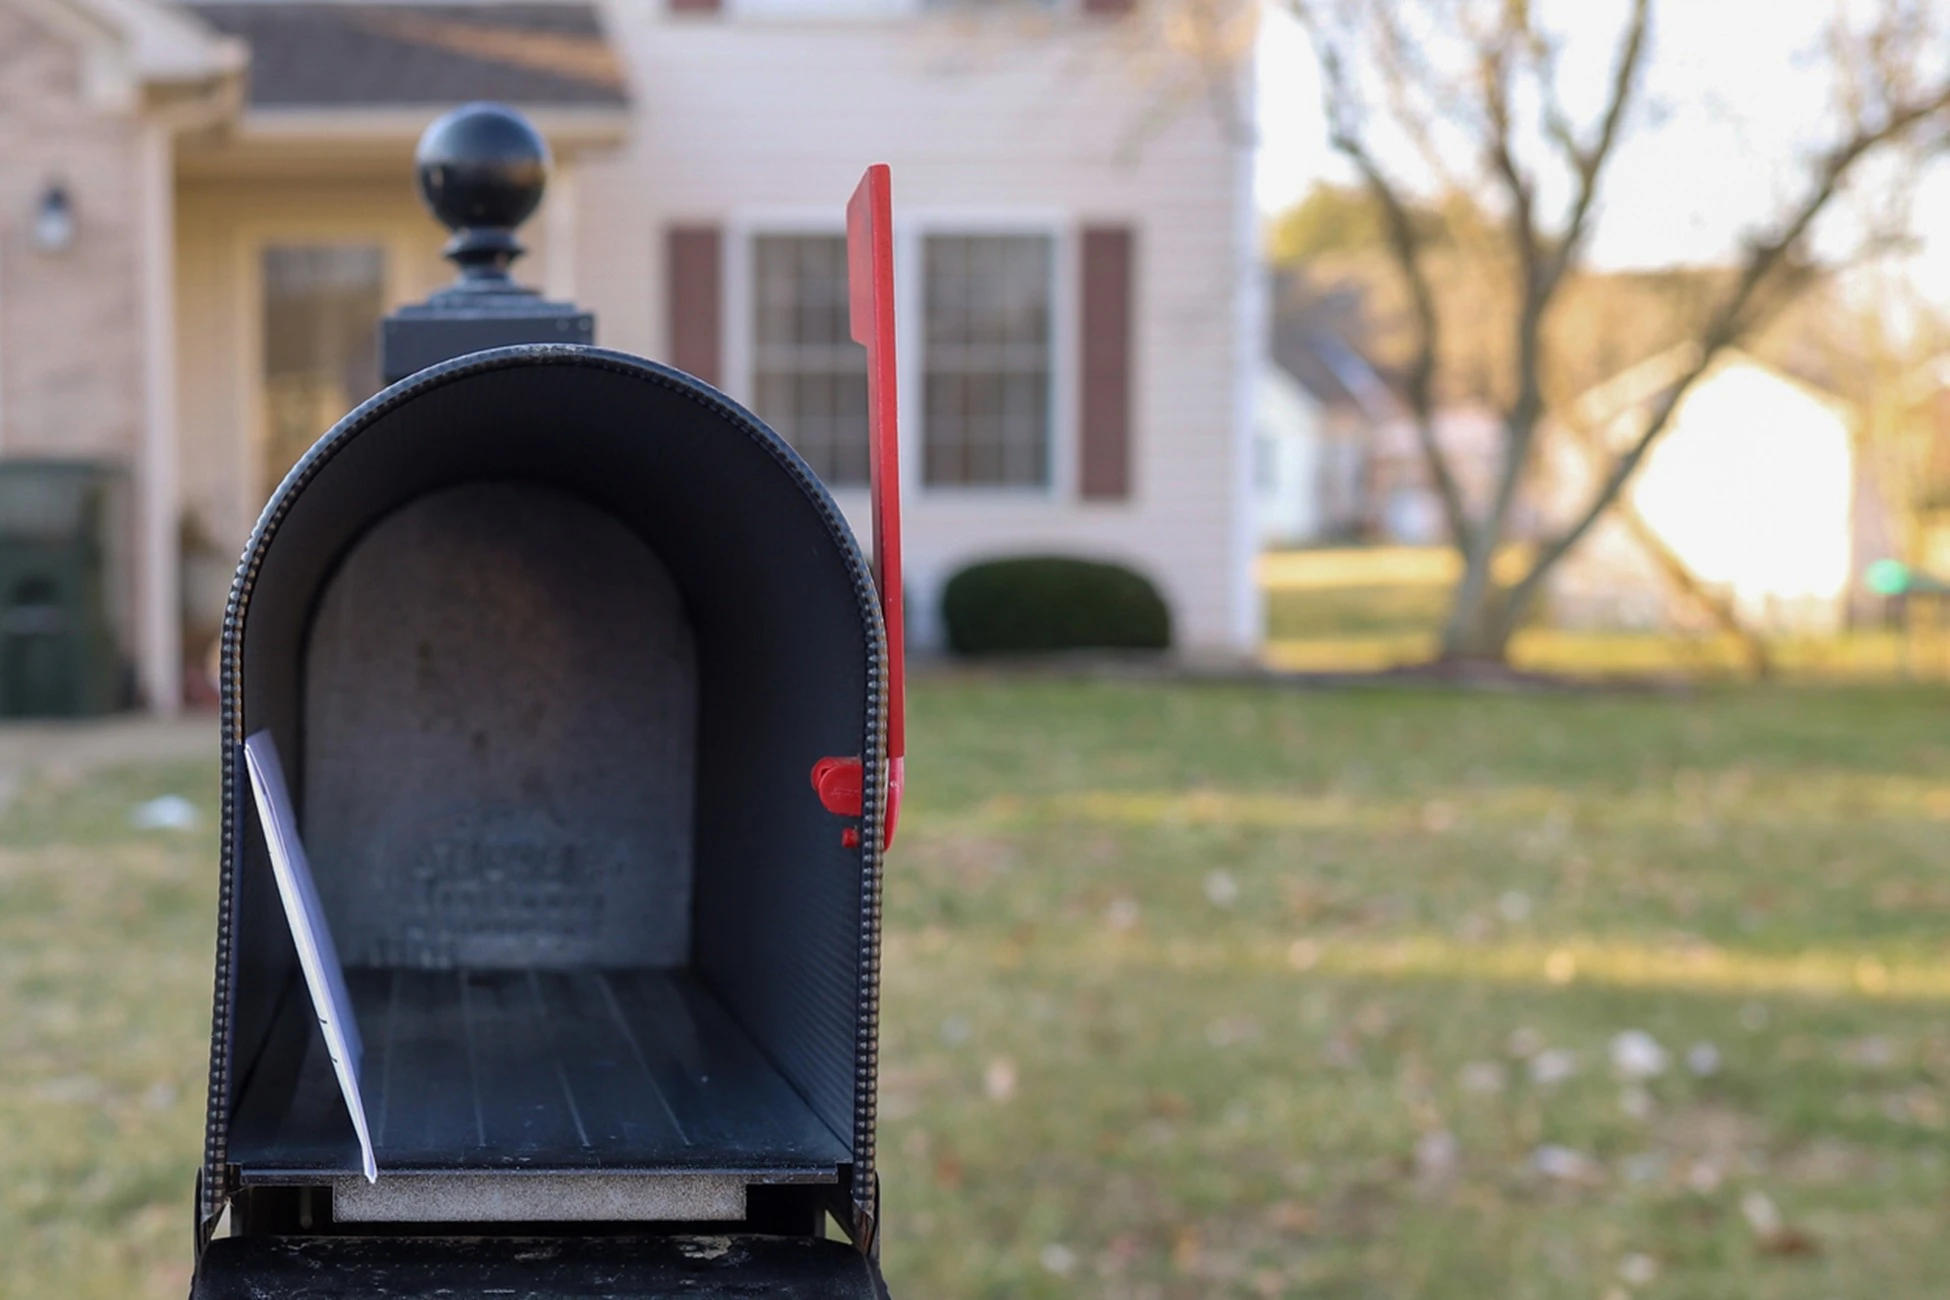 Set up plans for mail and packages to prevent theft and other hassles.